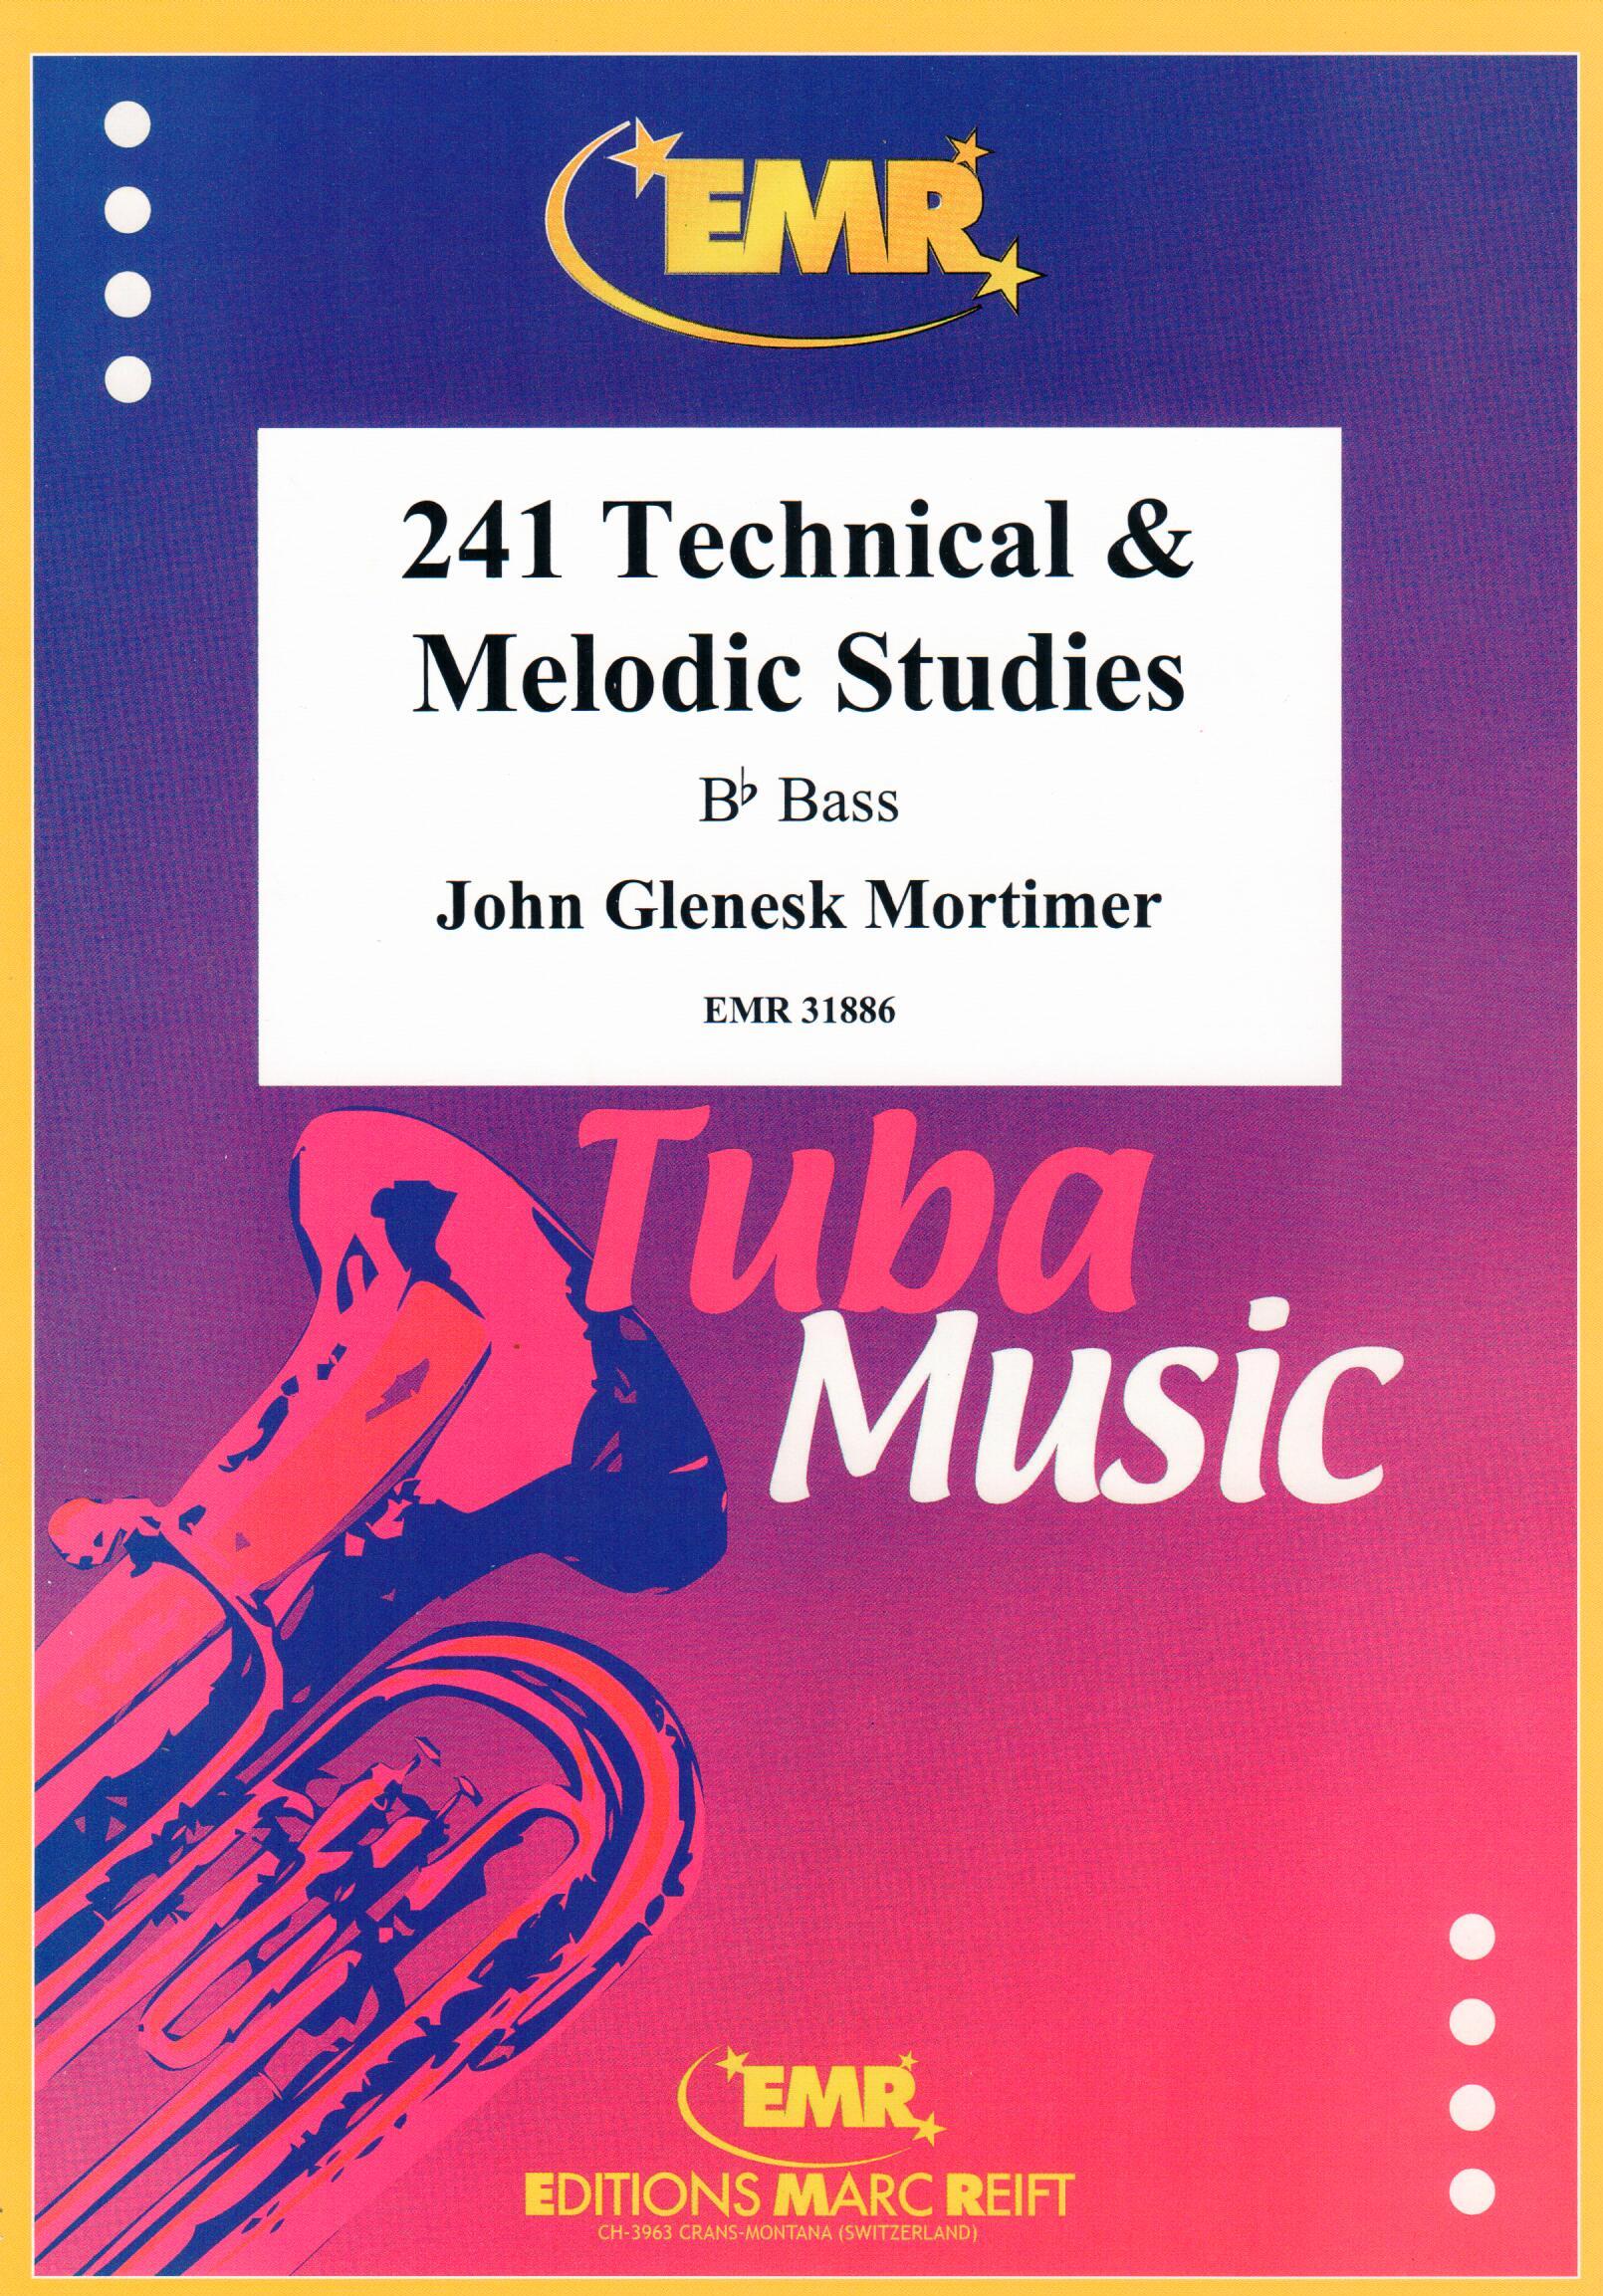 241 TECHNICAL & MELODIC STUDIES, SOLOS - E♭. Bass